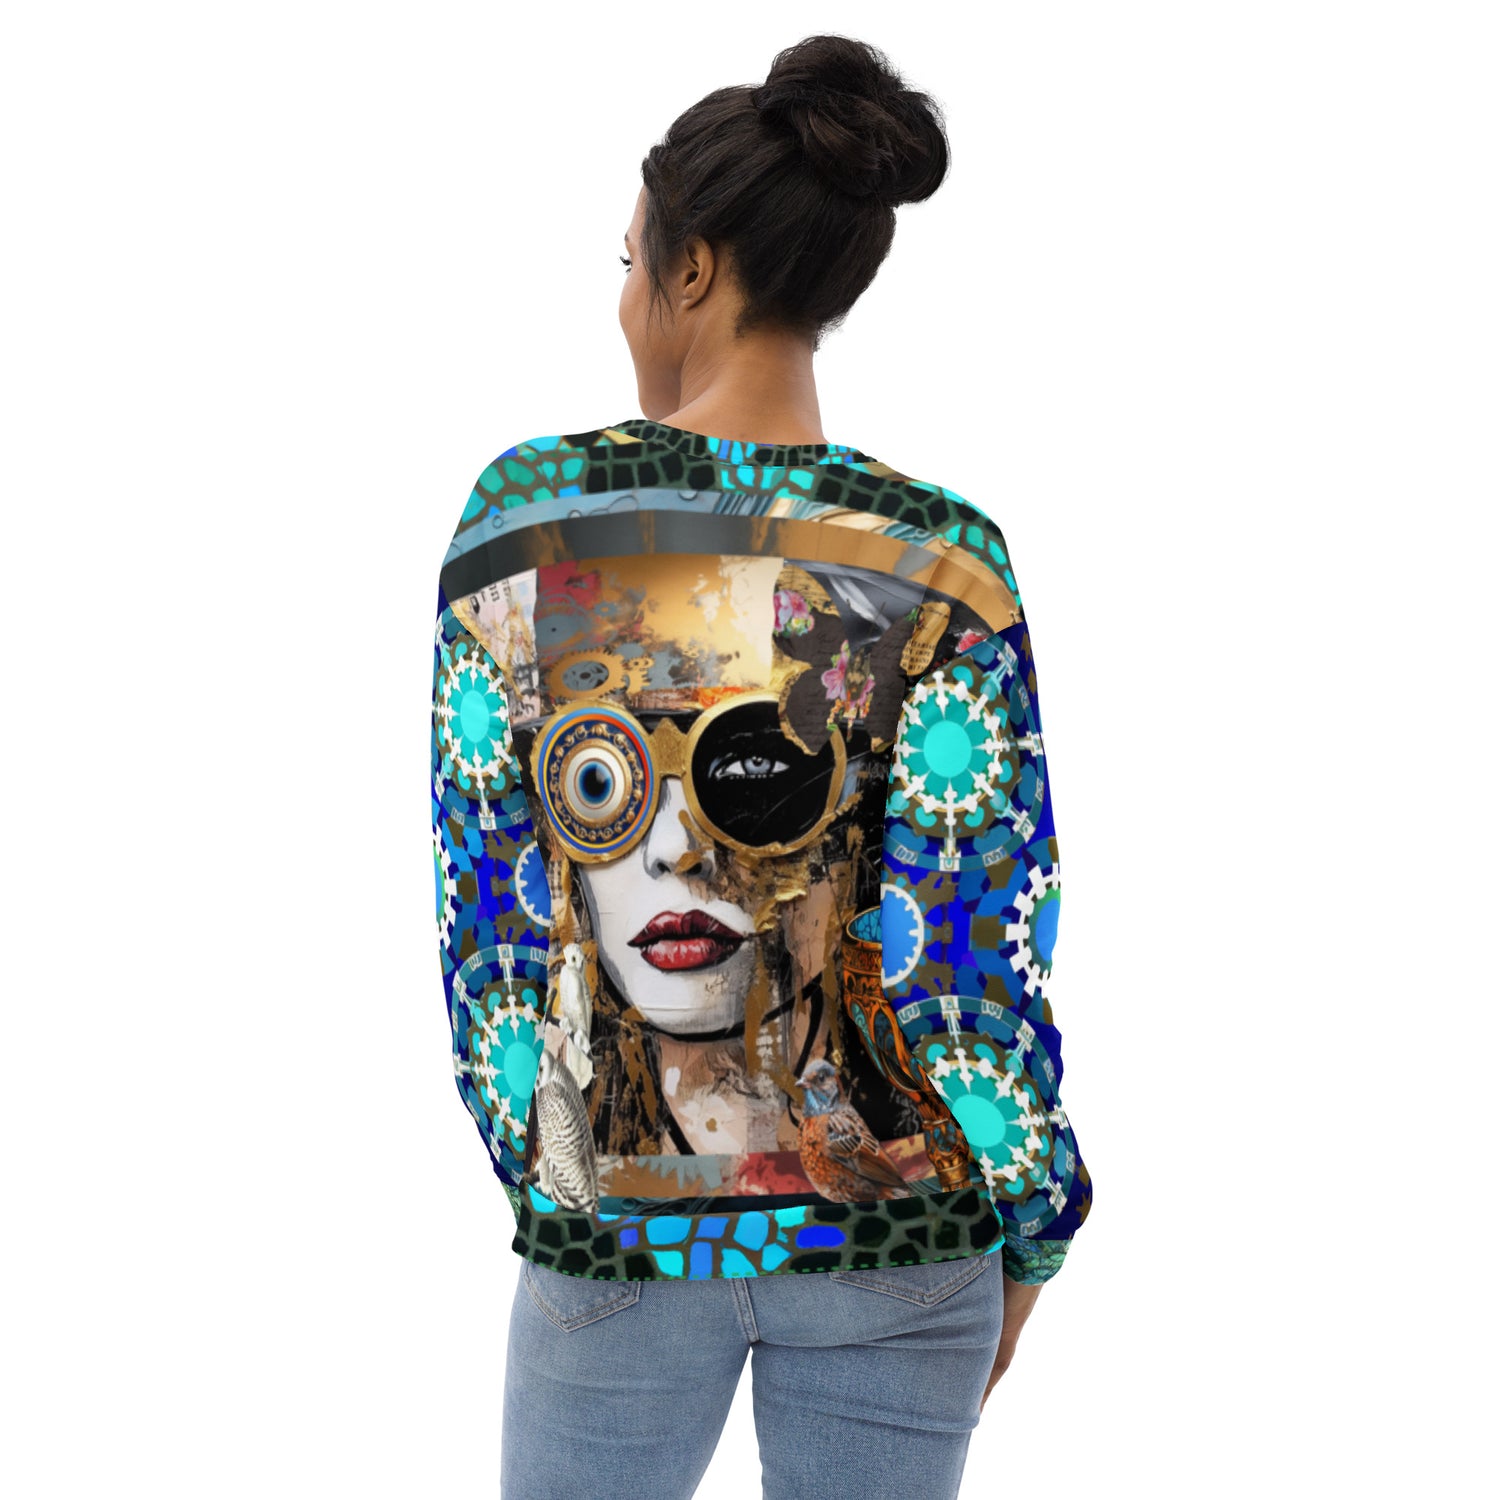 Steampunk Girl in Abstract Summer Weight Eco-Poly Unisex Sweatshirt